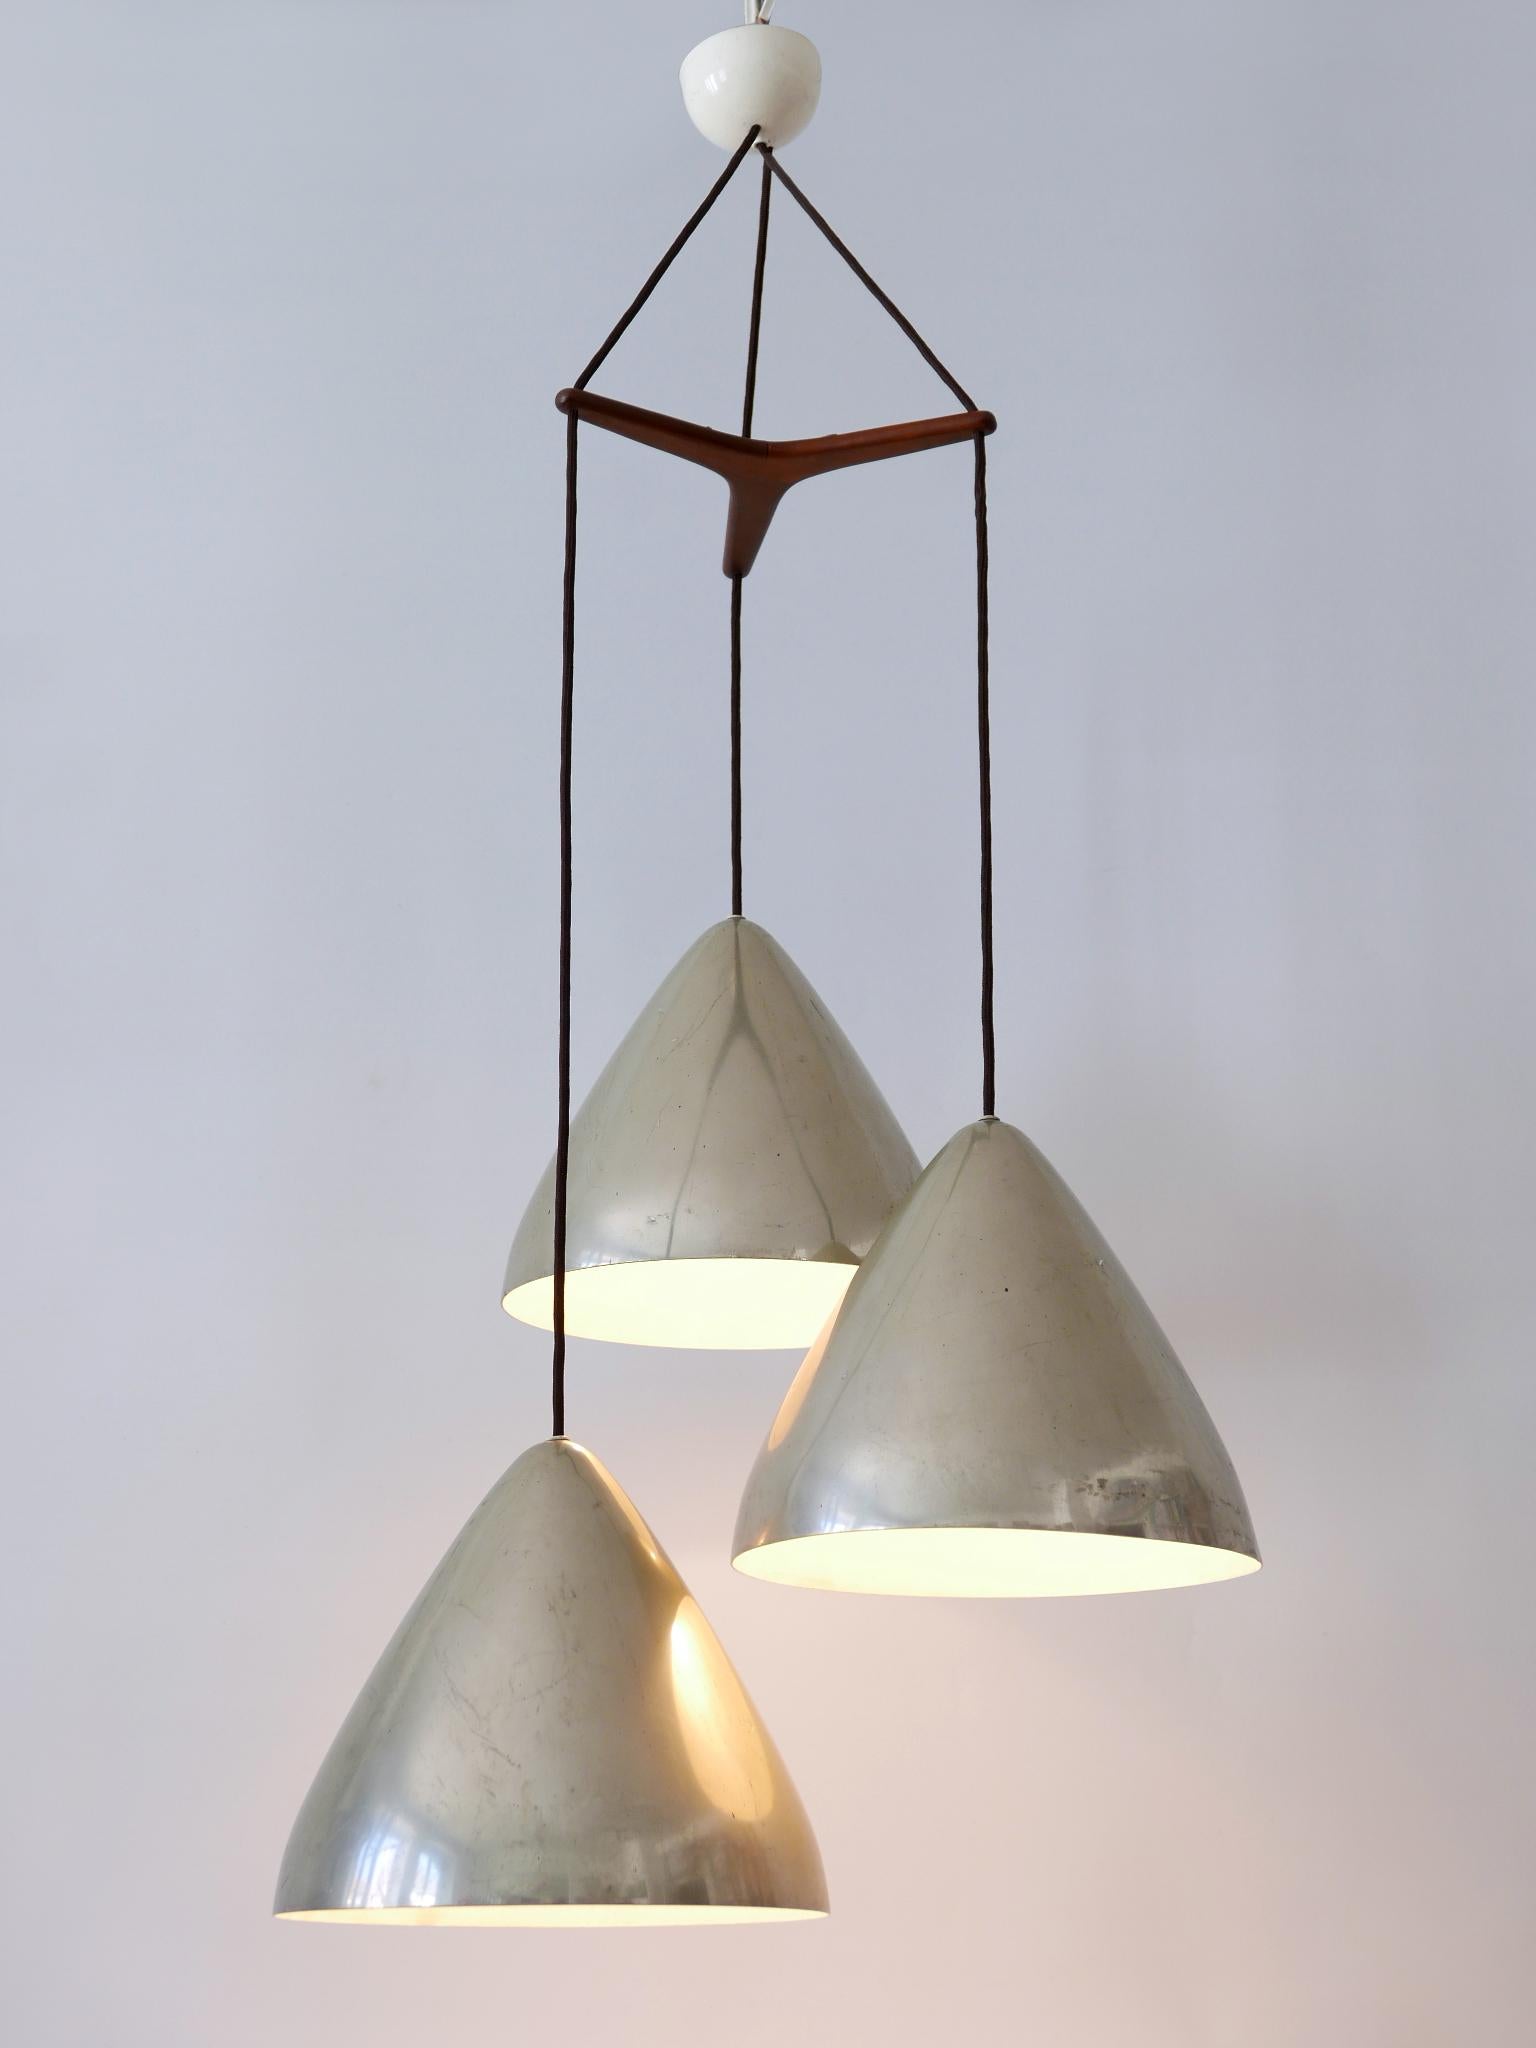 Finnish Elegant Cascading Pendant Lamp by Lisa Johansson-Pape for Orno Finland 1960s For Sale